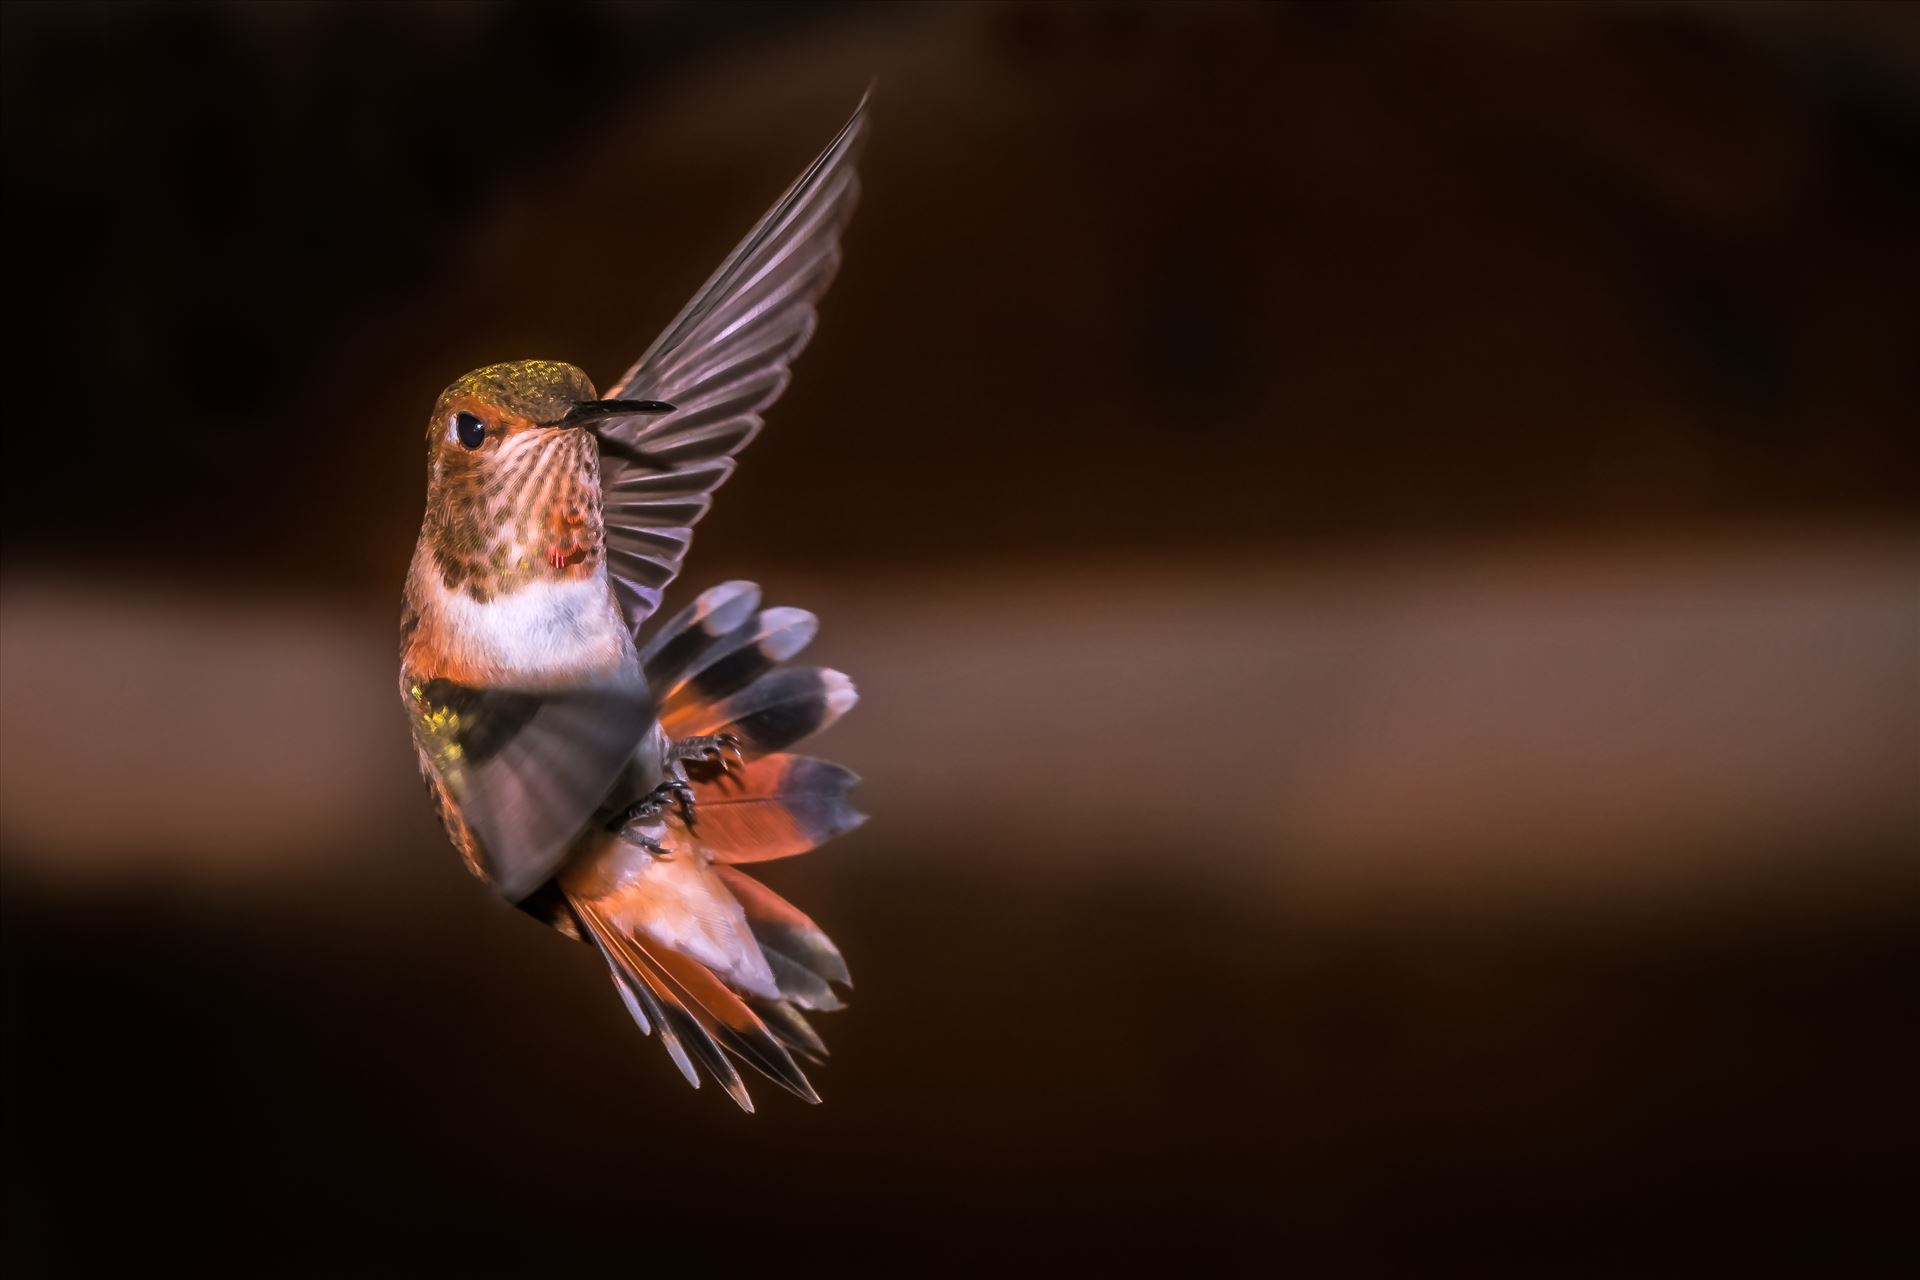 hummingbird in making turn in flight 8500639 ss as sf.jpg hummingbird making sharp turn while in flight, Cloudcroft New Mexico by Terry Kelly Photography